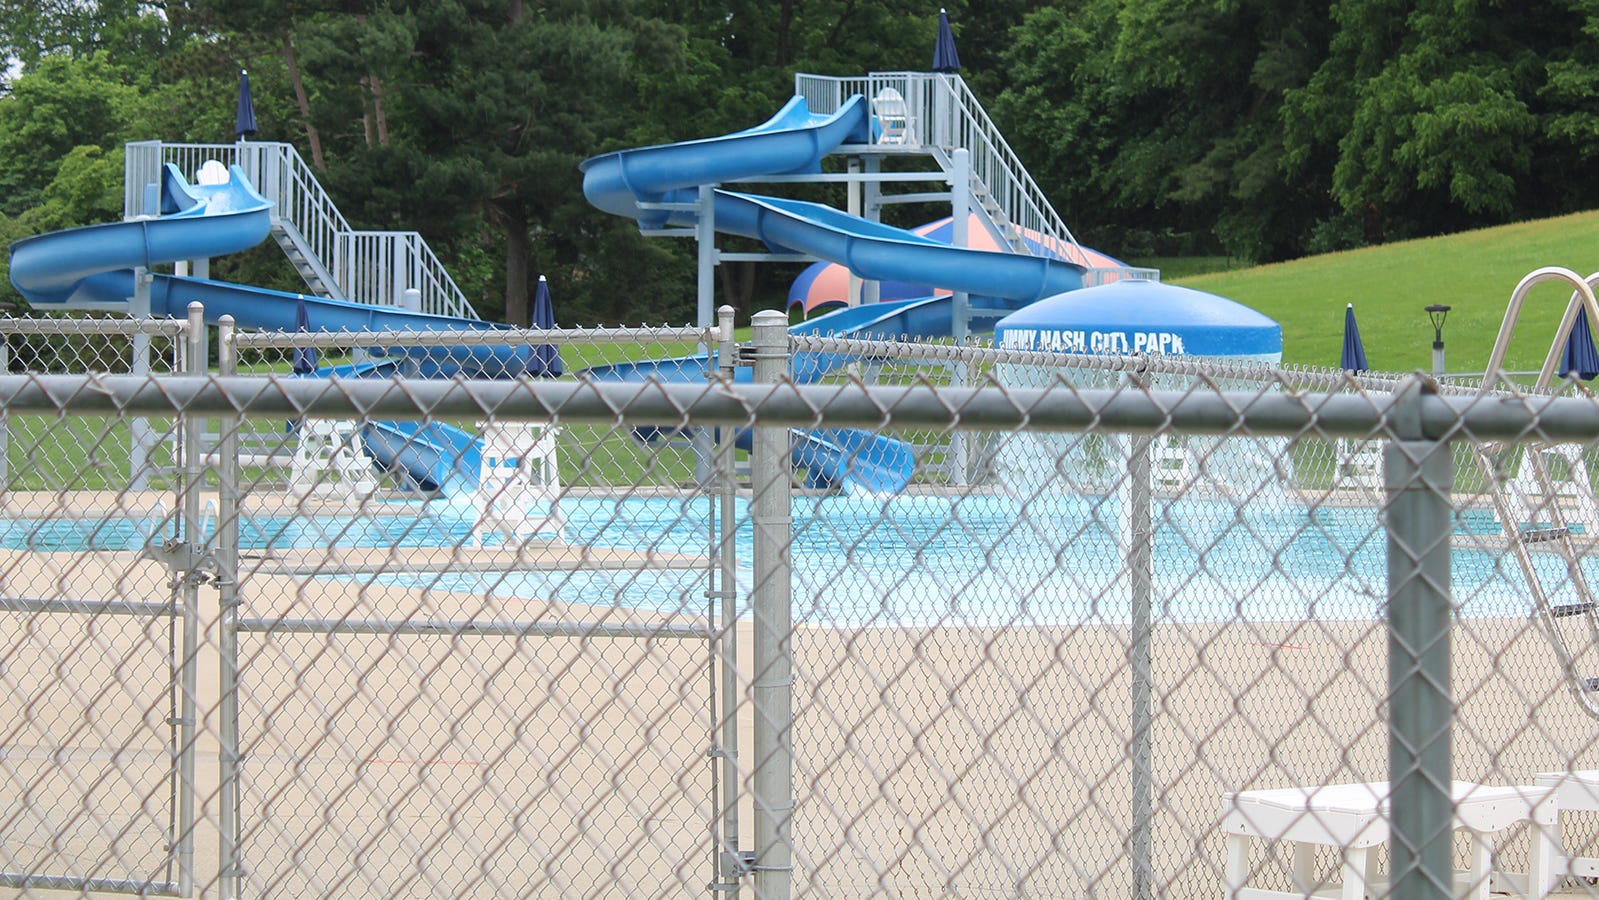 Jimmy Nash Park Pool Expected To Open Saturday For Season 6038